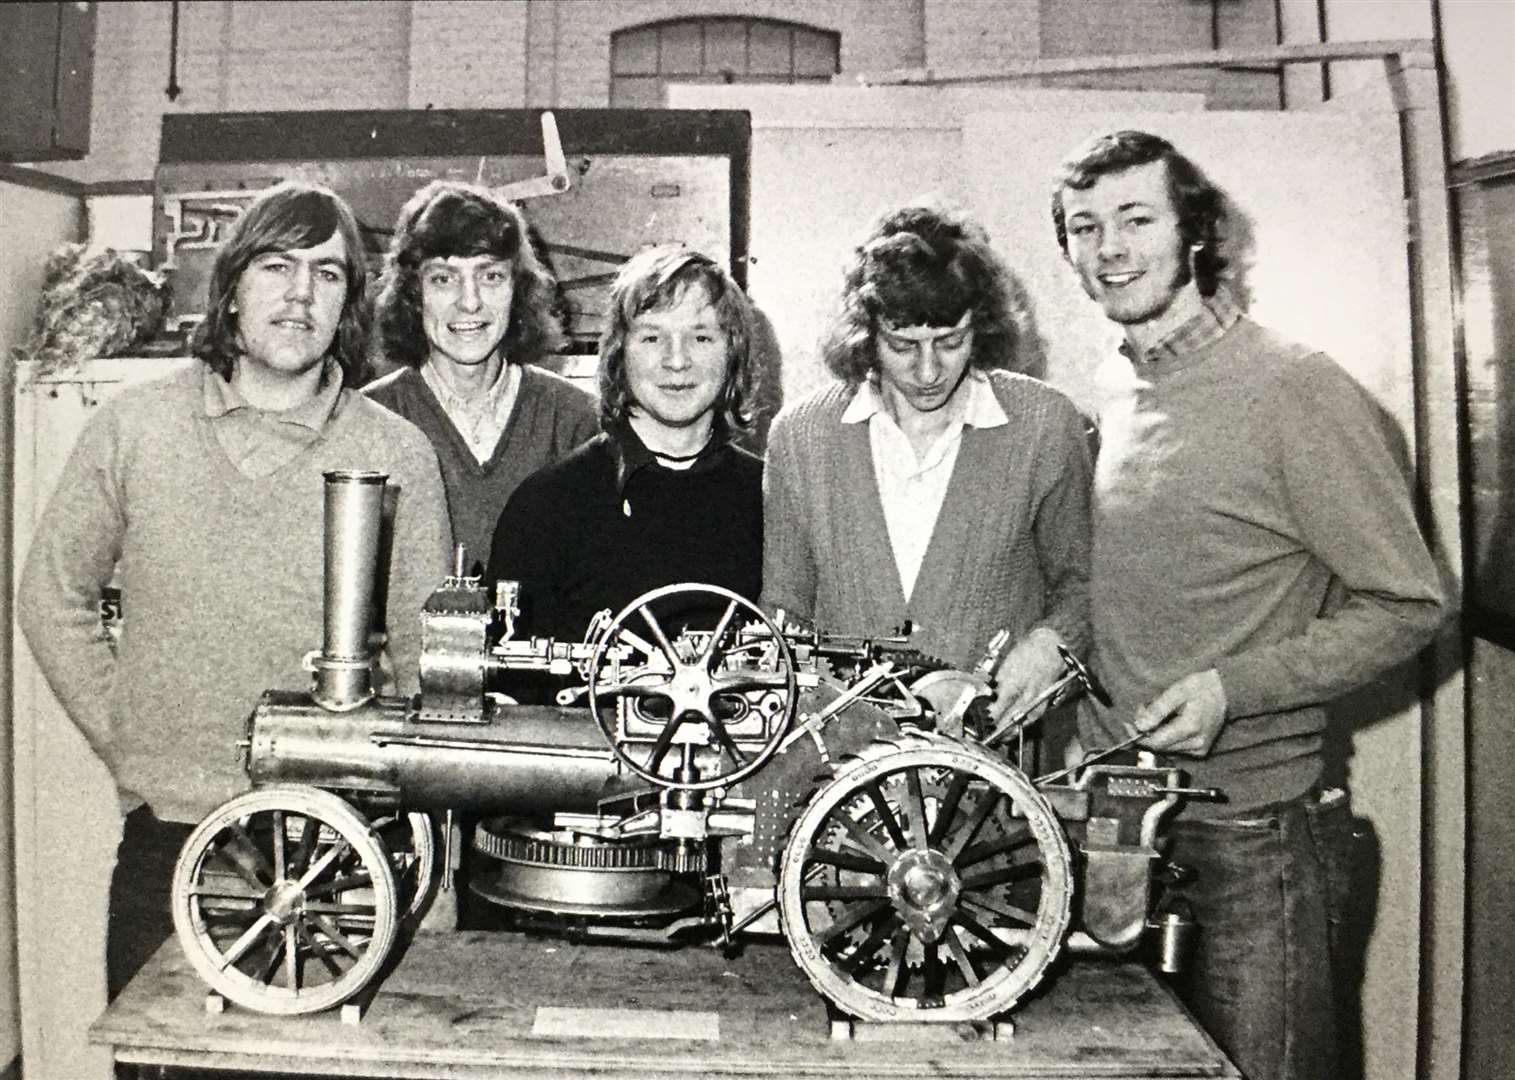 THEN - Steve Goldup, Colin Rich, Anthony Jenkins, Terry Watson and David Jenkins, who created the model engine when they were apprentices at the former Ashford railway works in the 1970s (1291507)